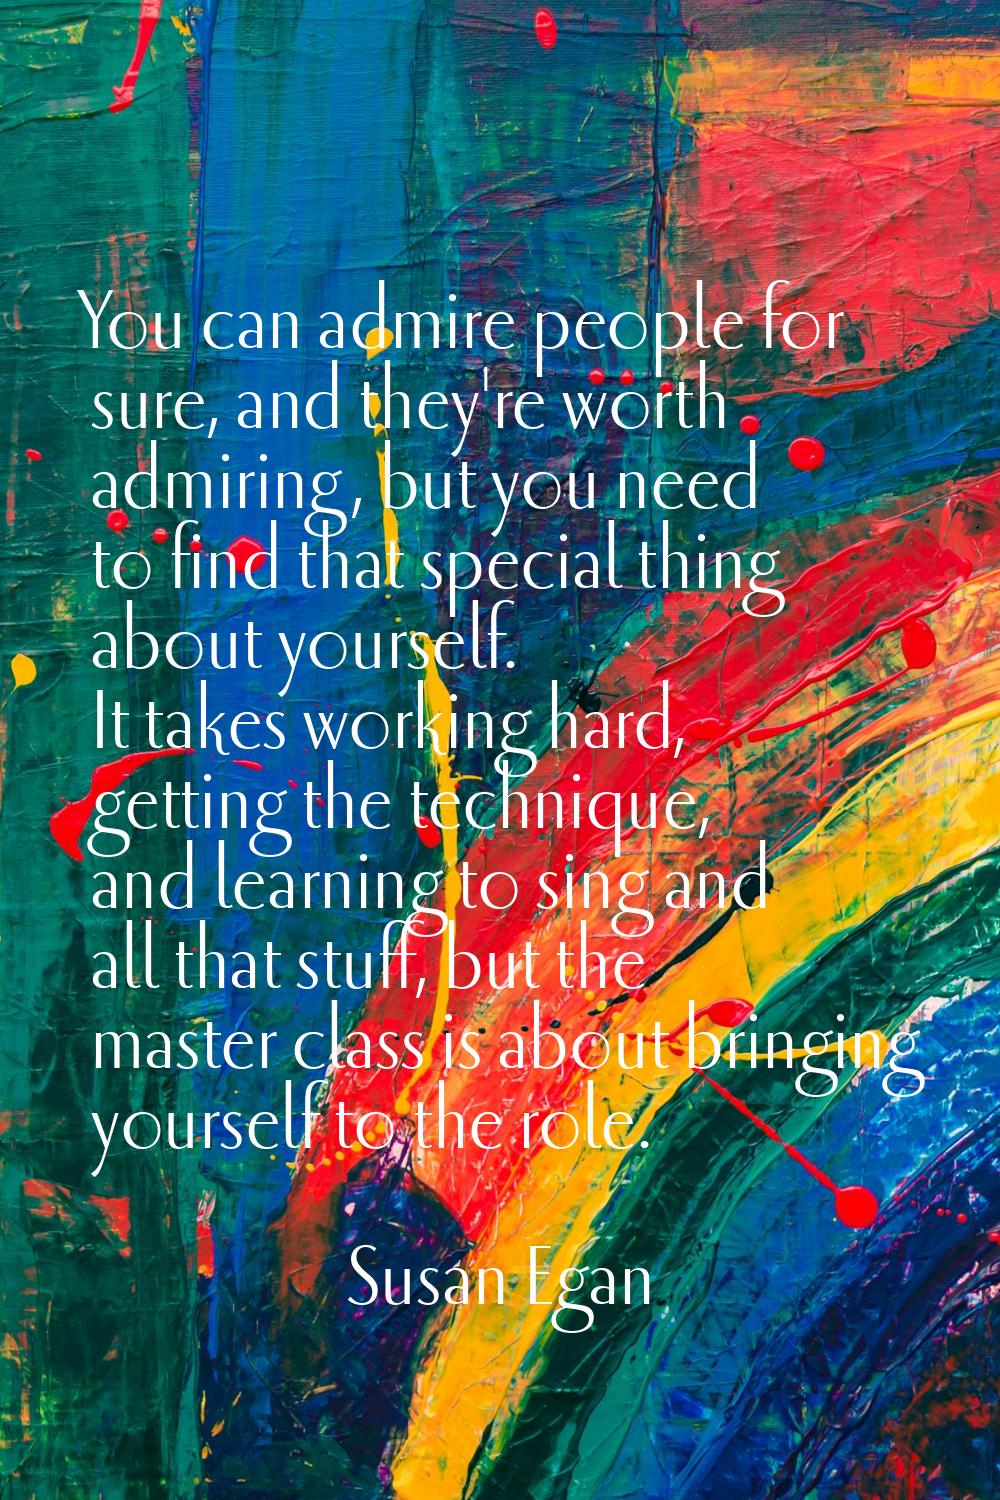 You can admire people for sure, and they're worth admiring, but you need to find that special thing